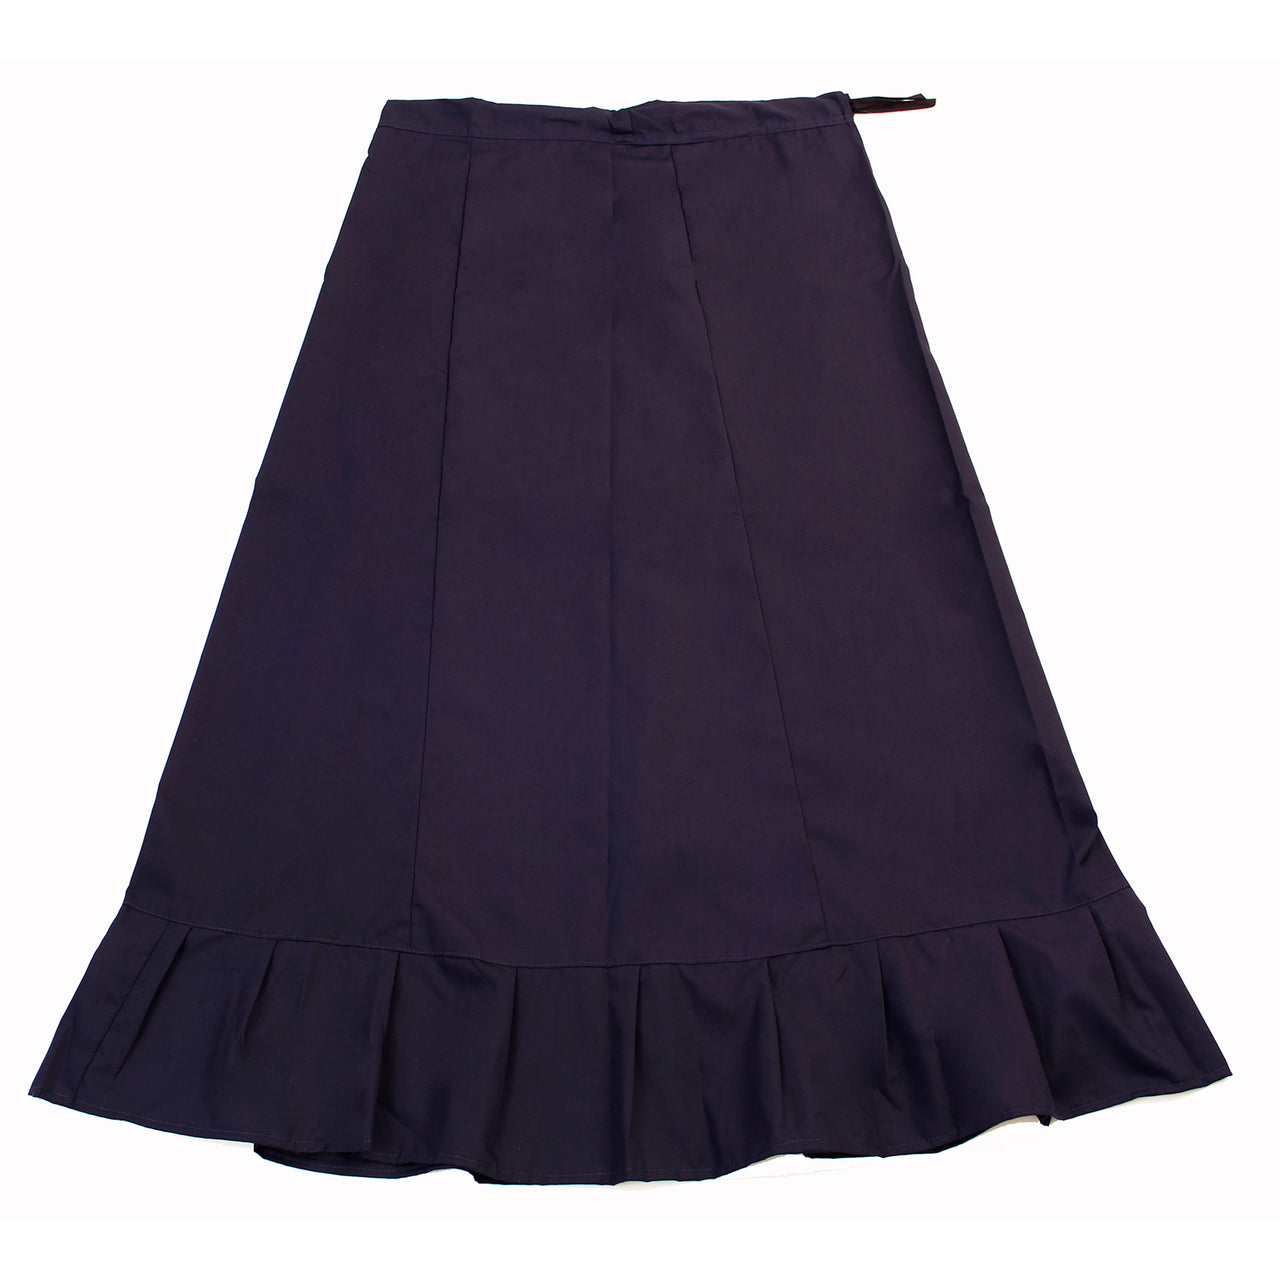 Navy Blue - Sari (Saree) Petticoat - Available in S, M, L & XL - Underskirts For Sari's